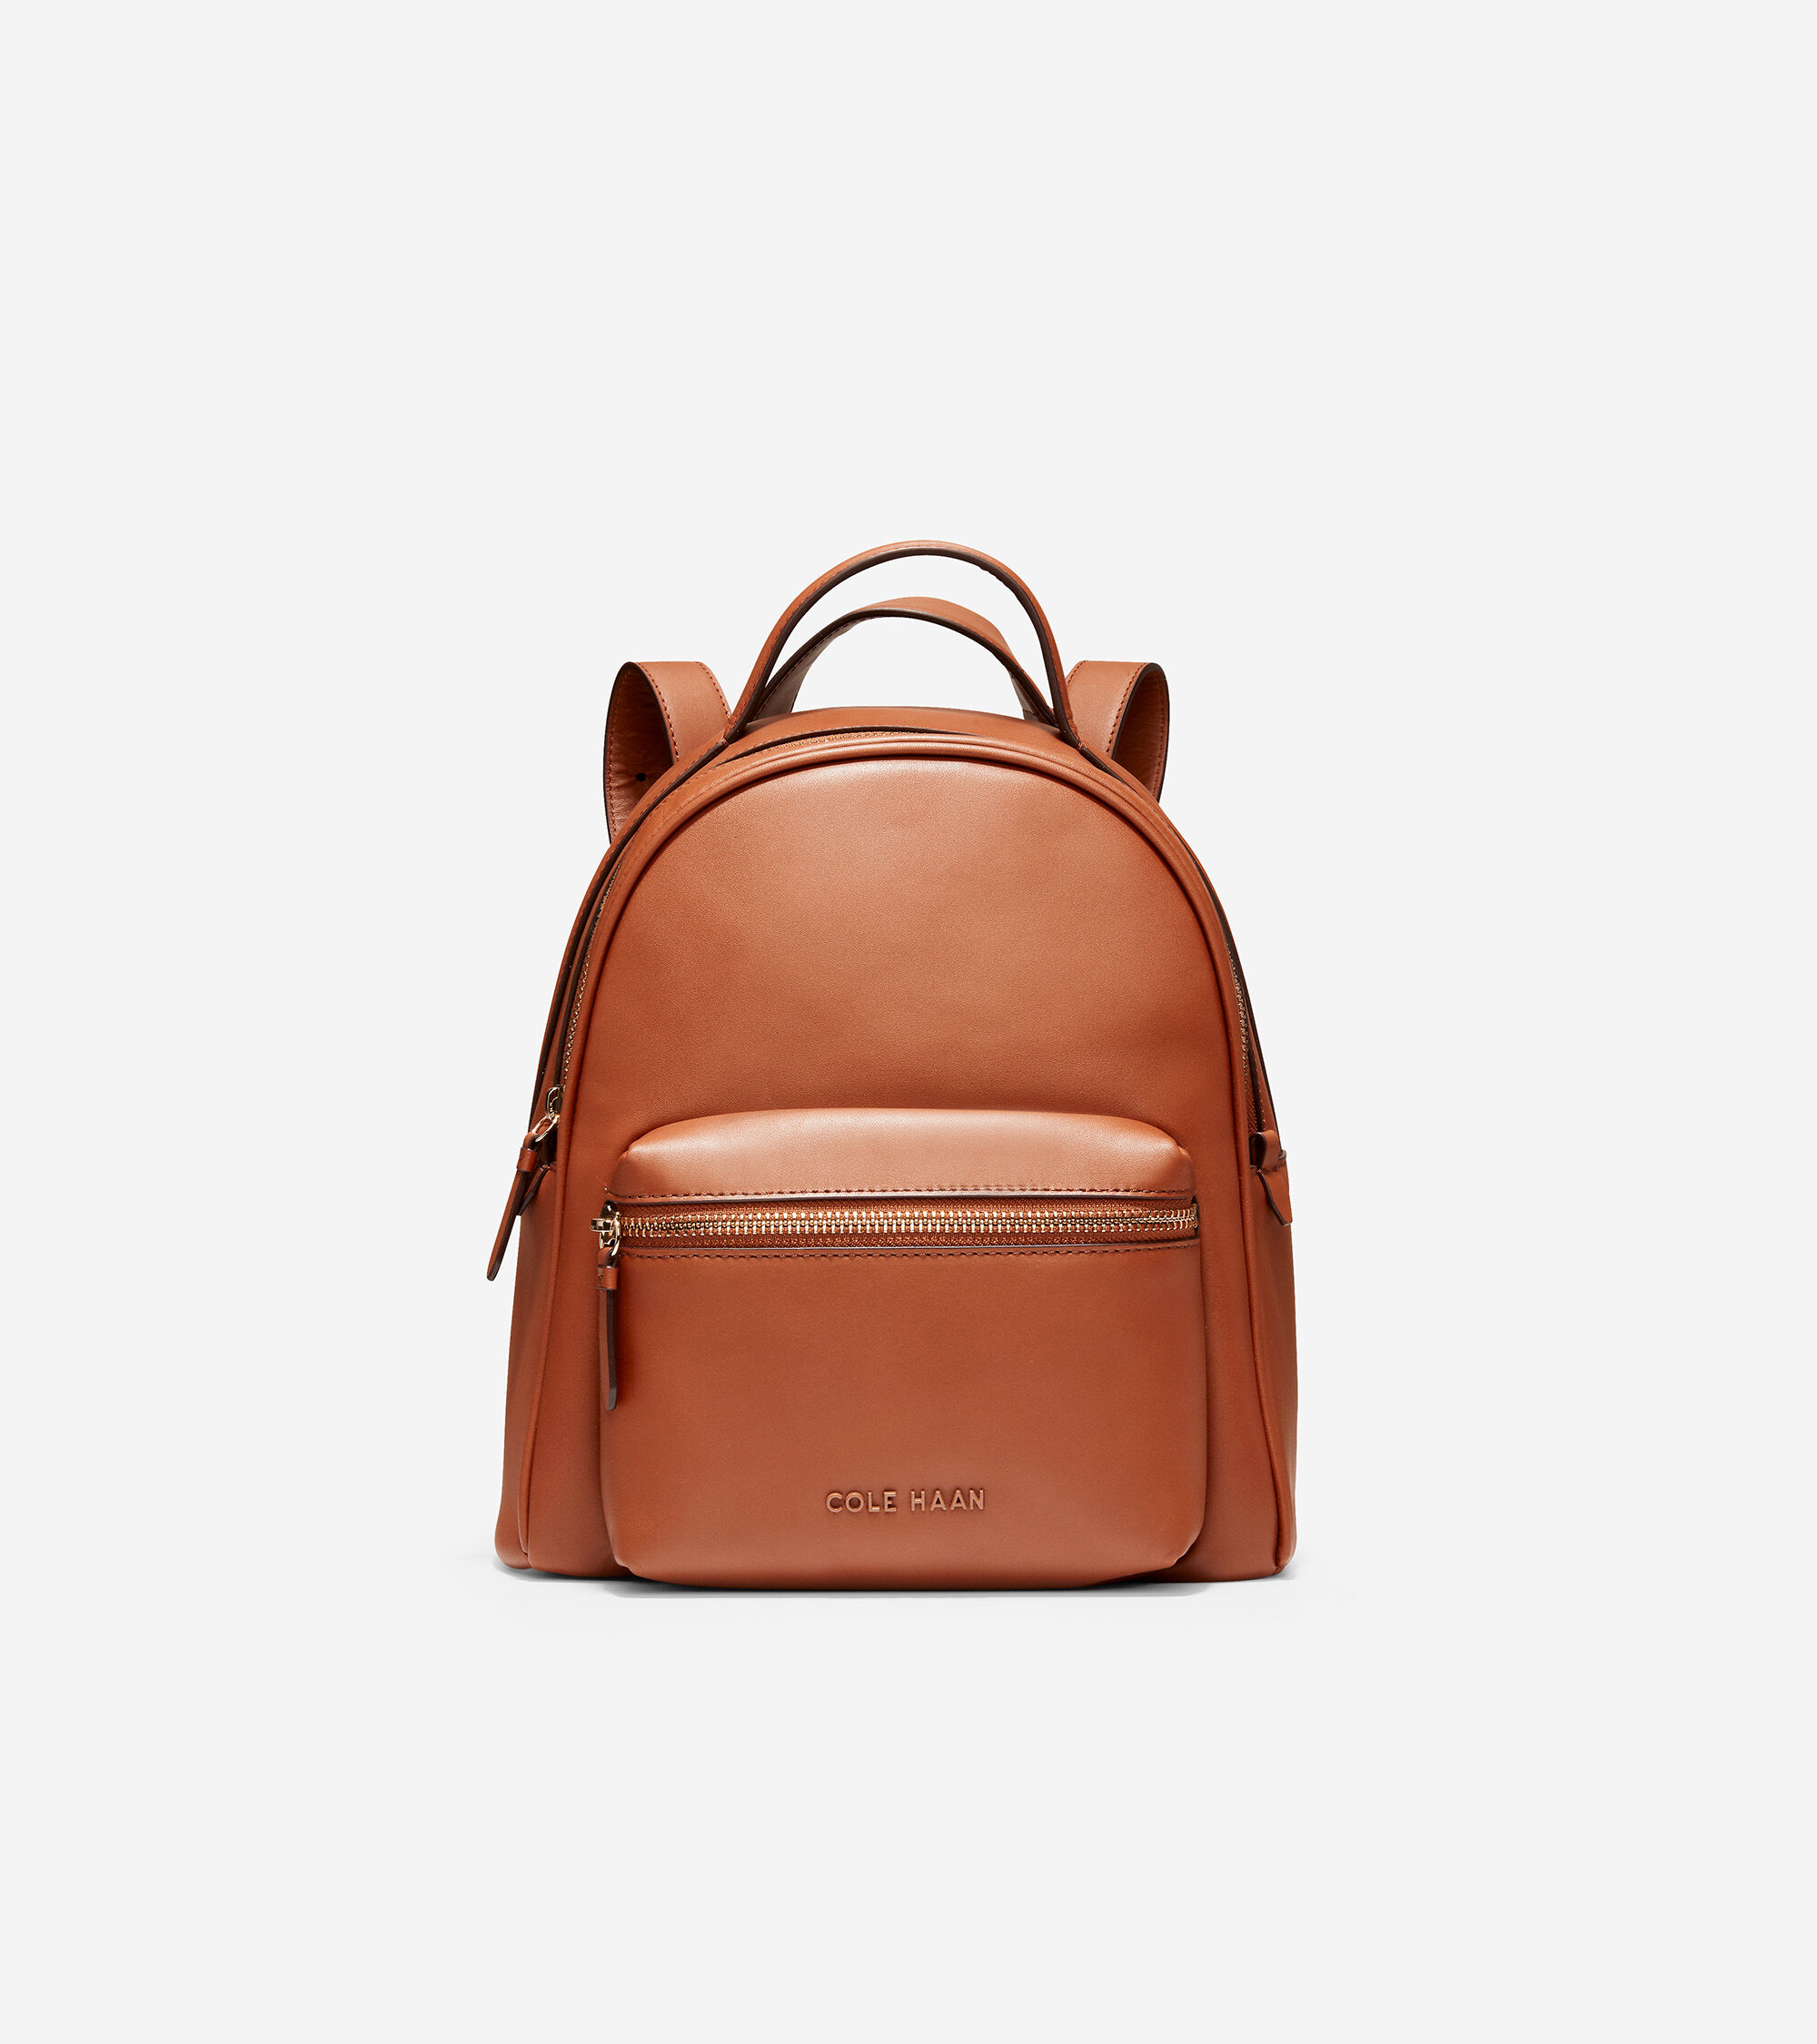 Grand Ambition Mini Backpack in BROWN   Cole Haan